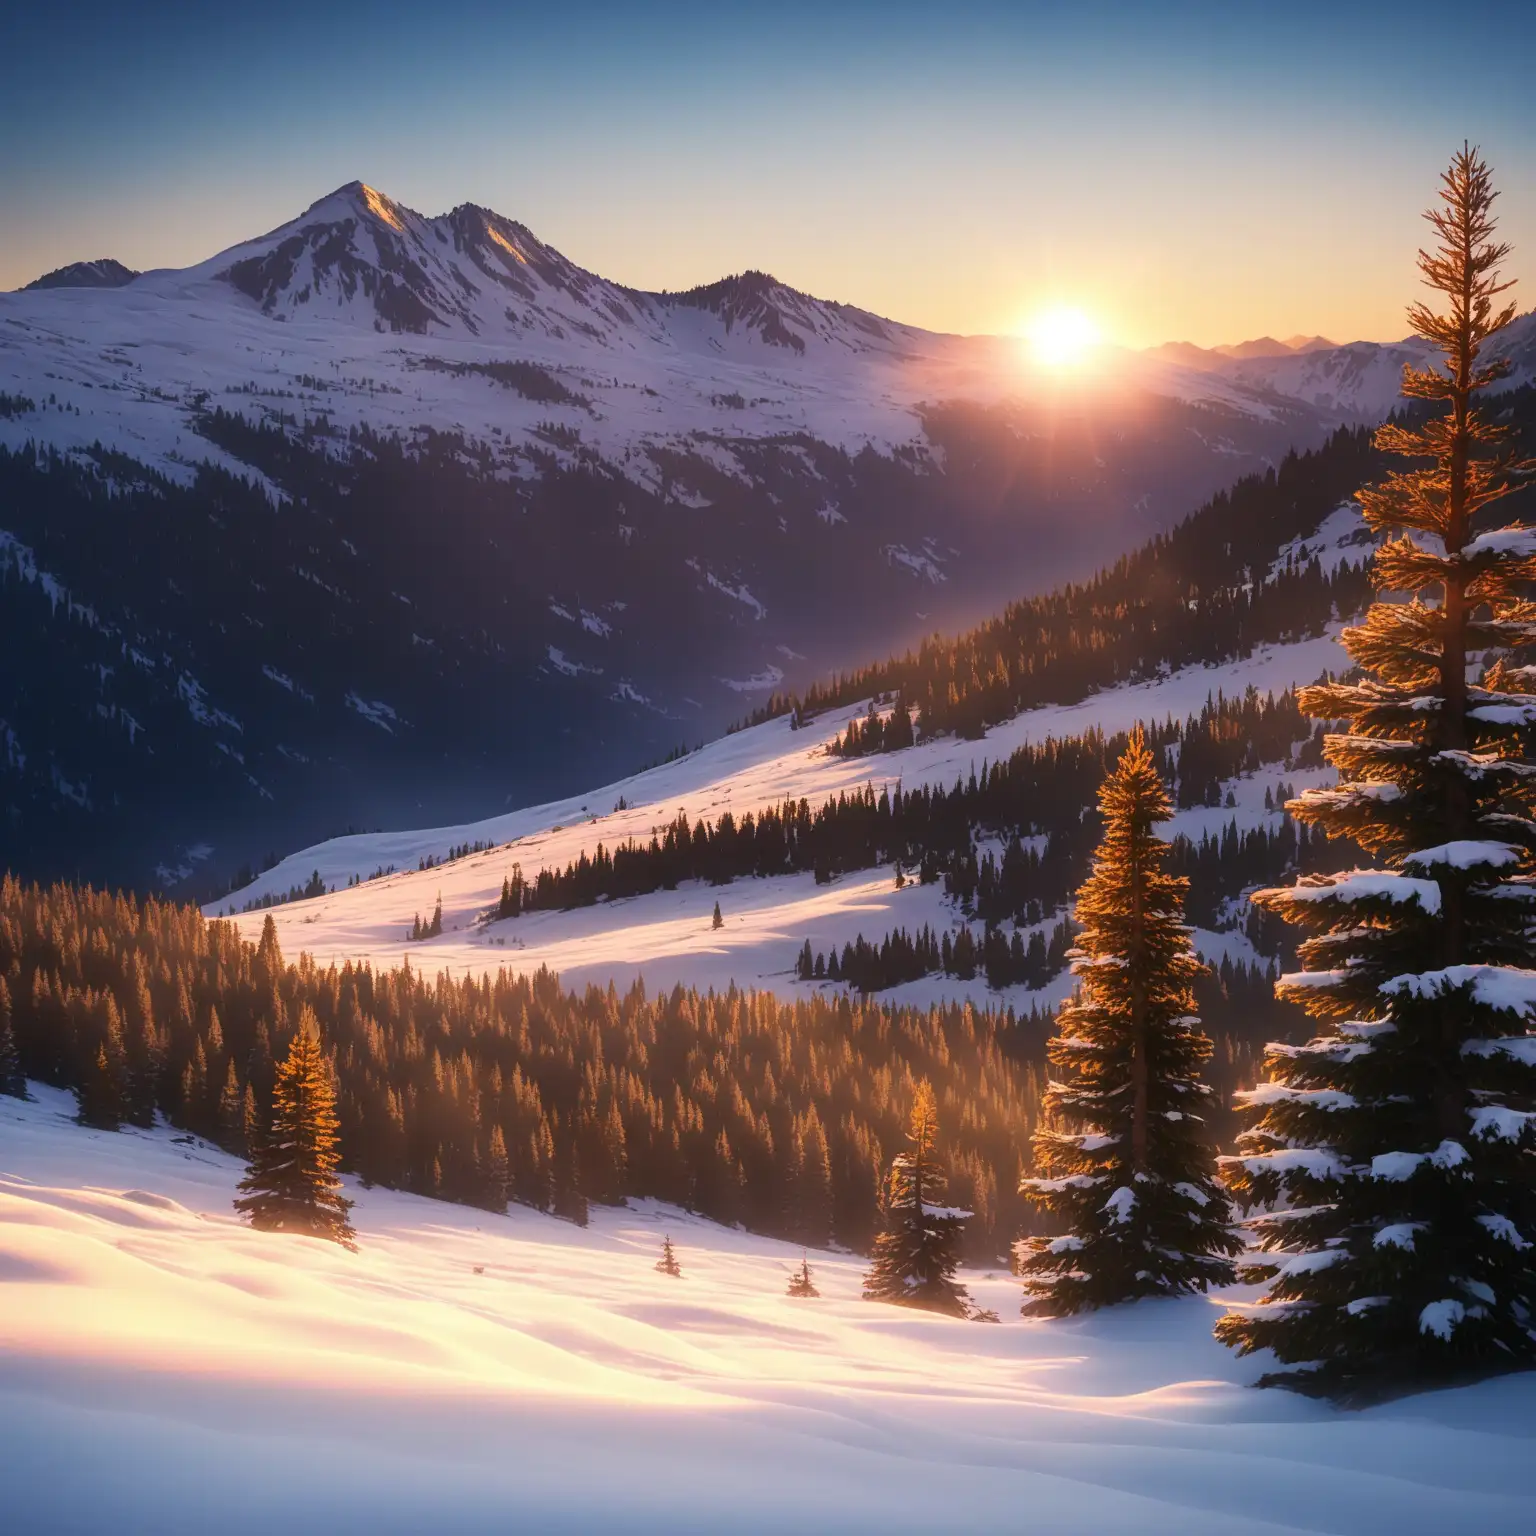 Serene Sunrise in Snowy Mountain Valley with Pine Trees